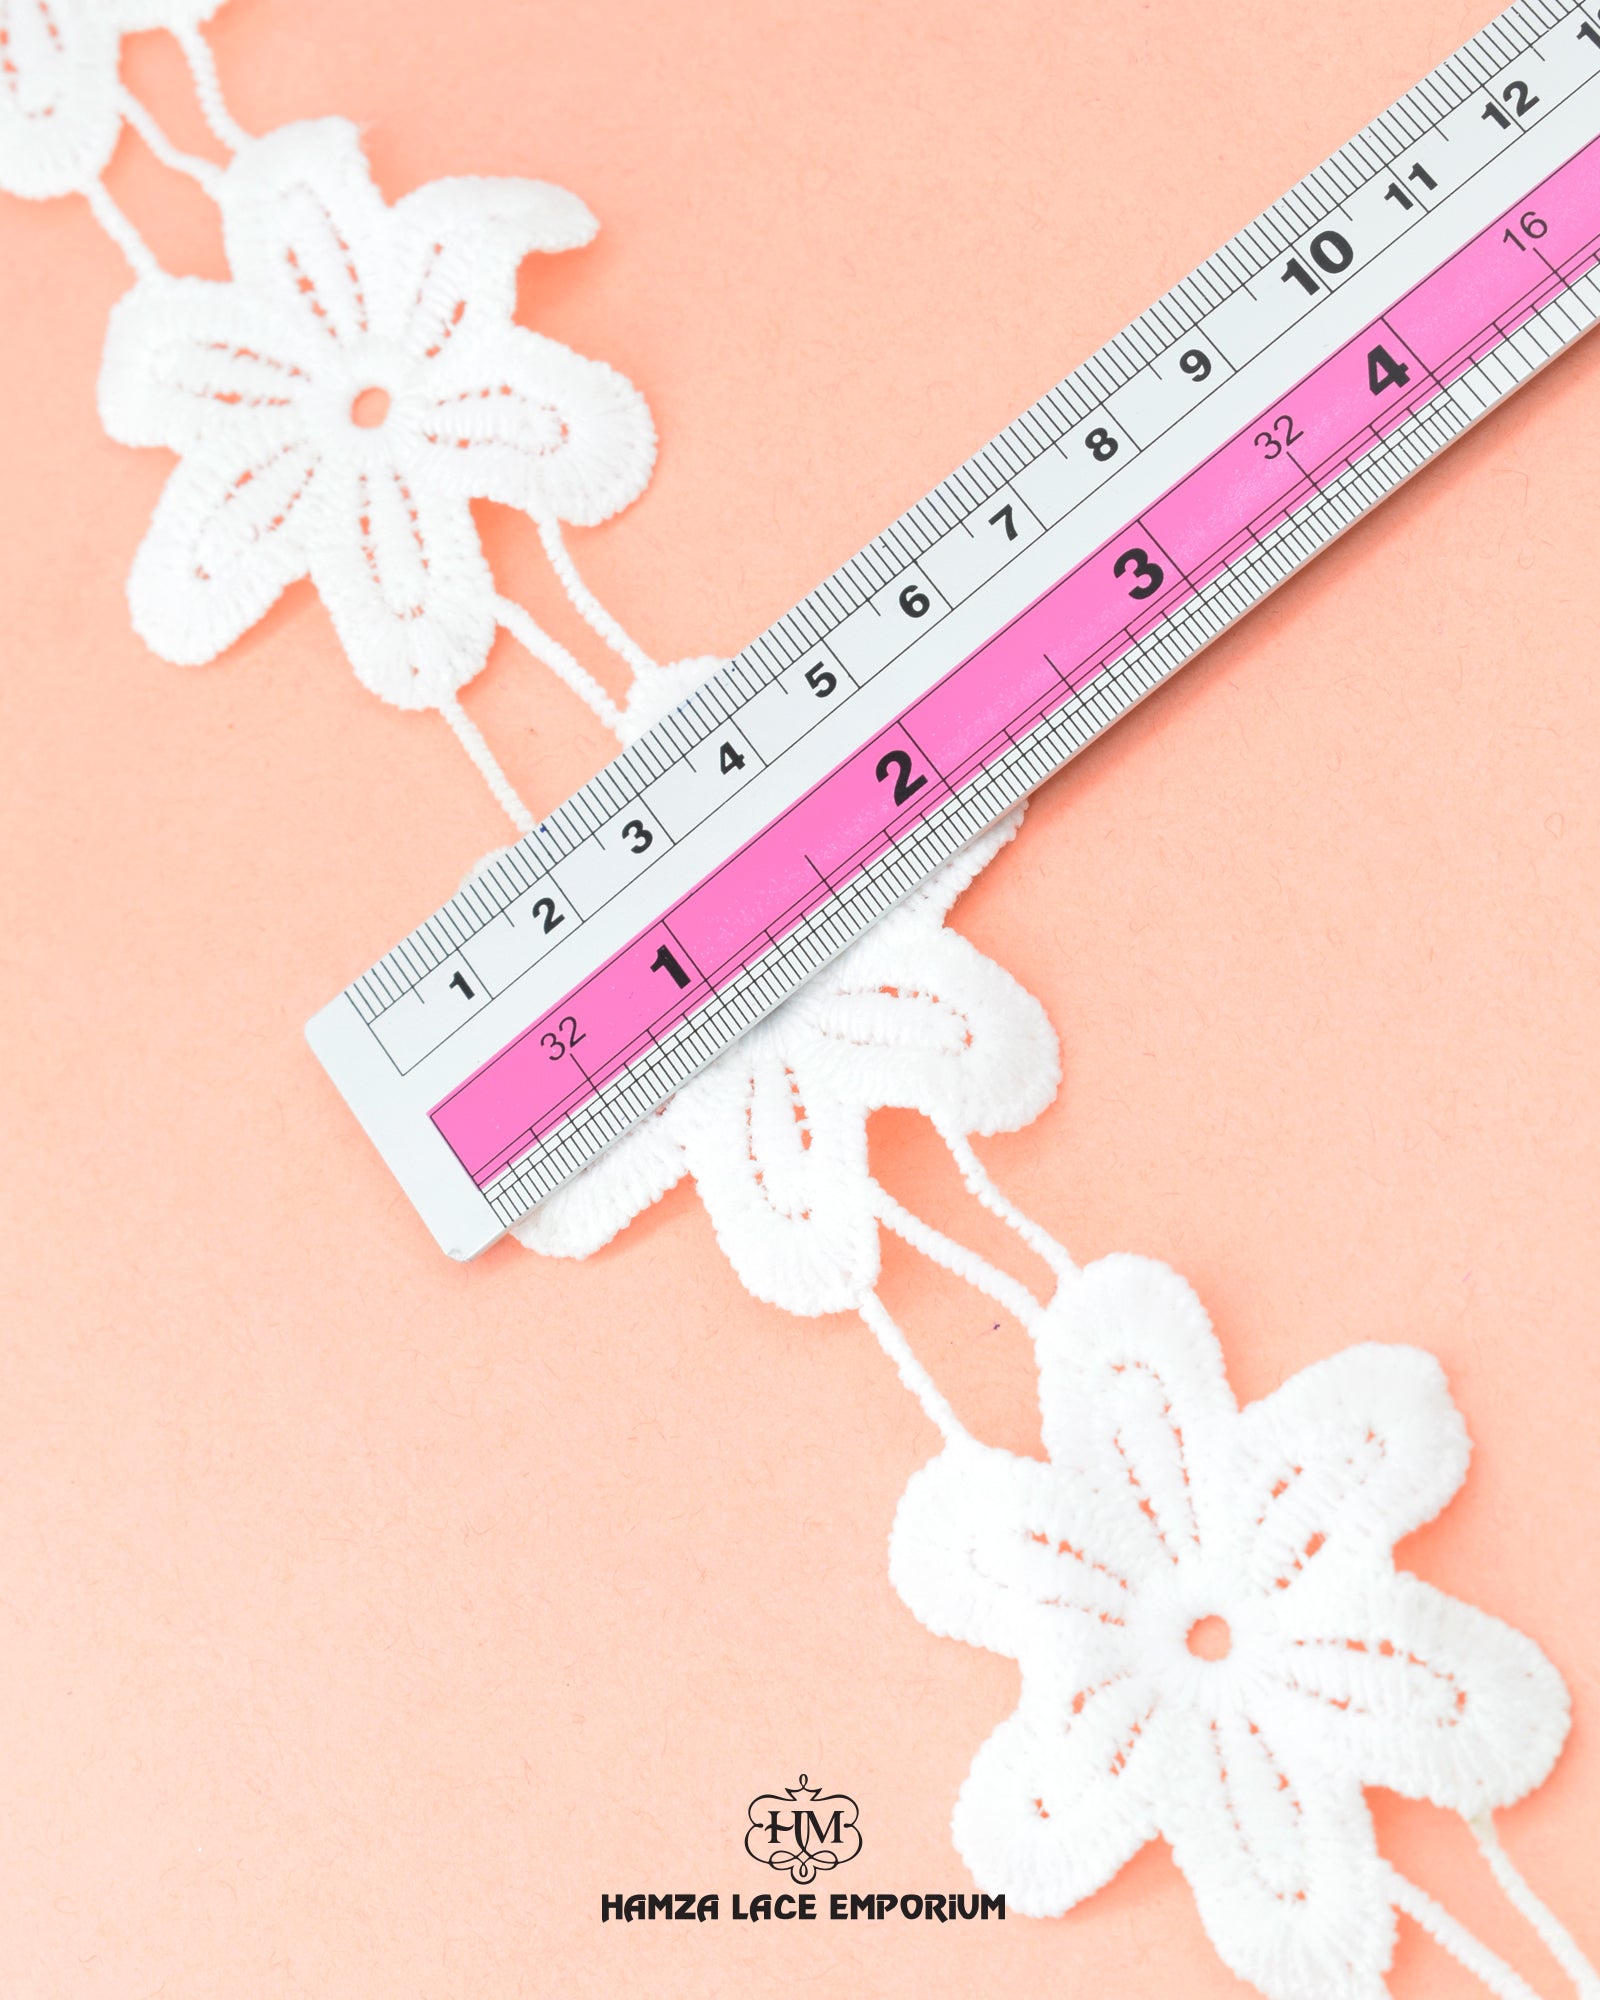 The size of the 'Center Flower Lace 23379' is given as '2' inches by placing a ruler on it